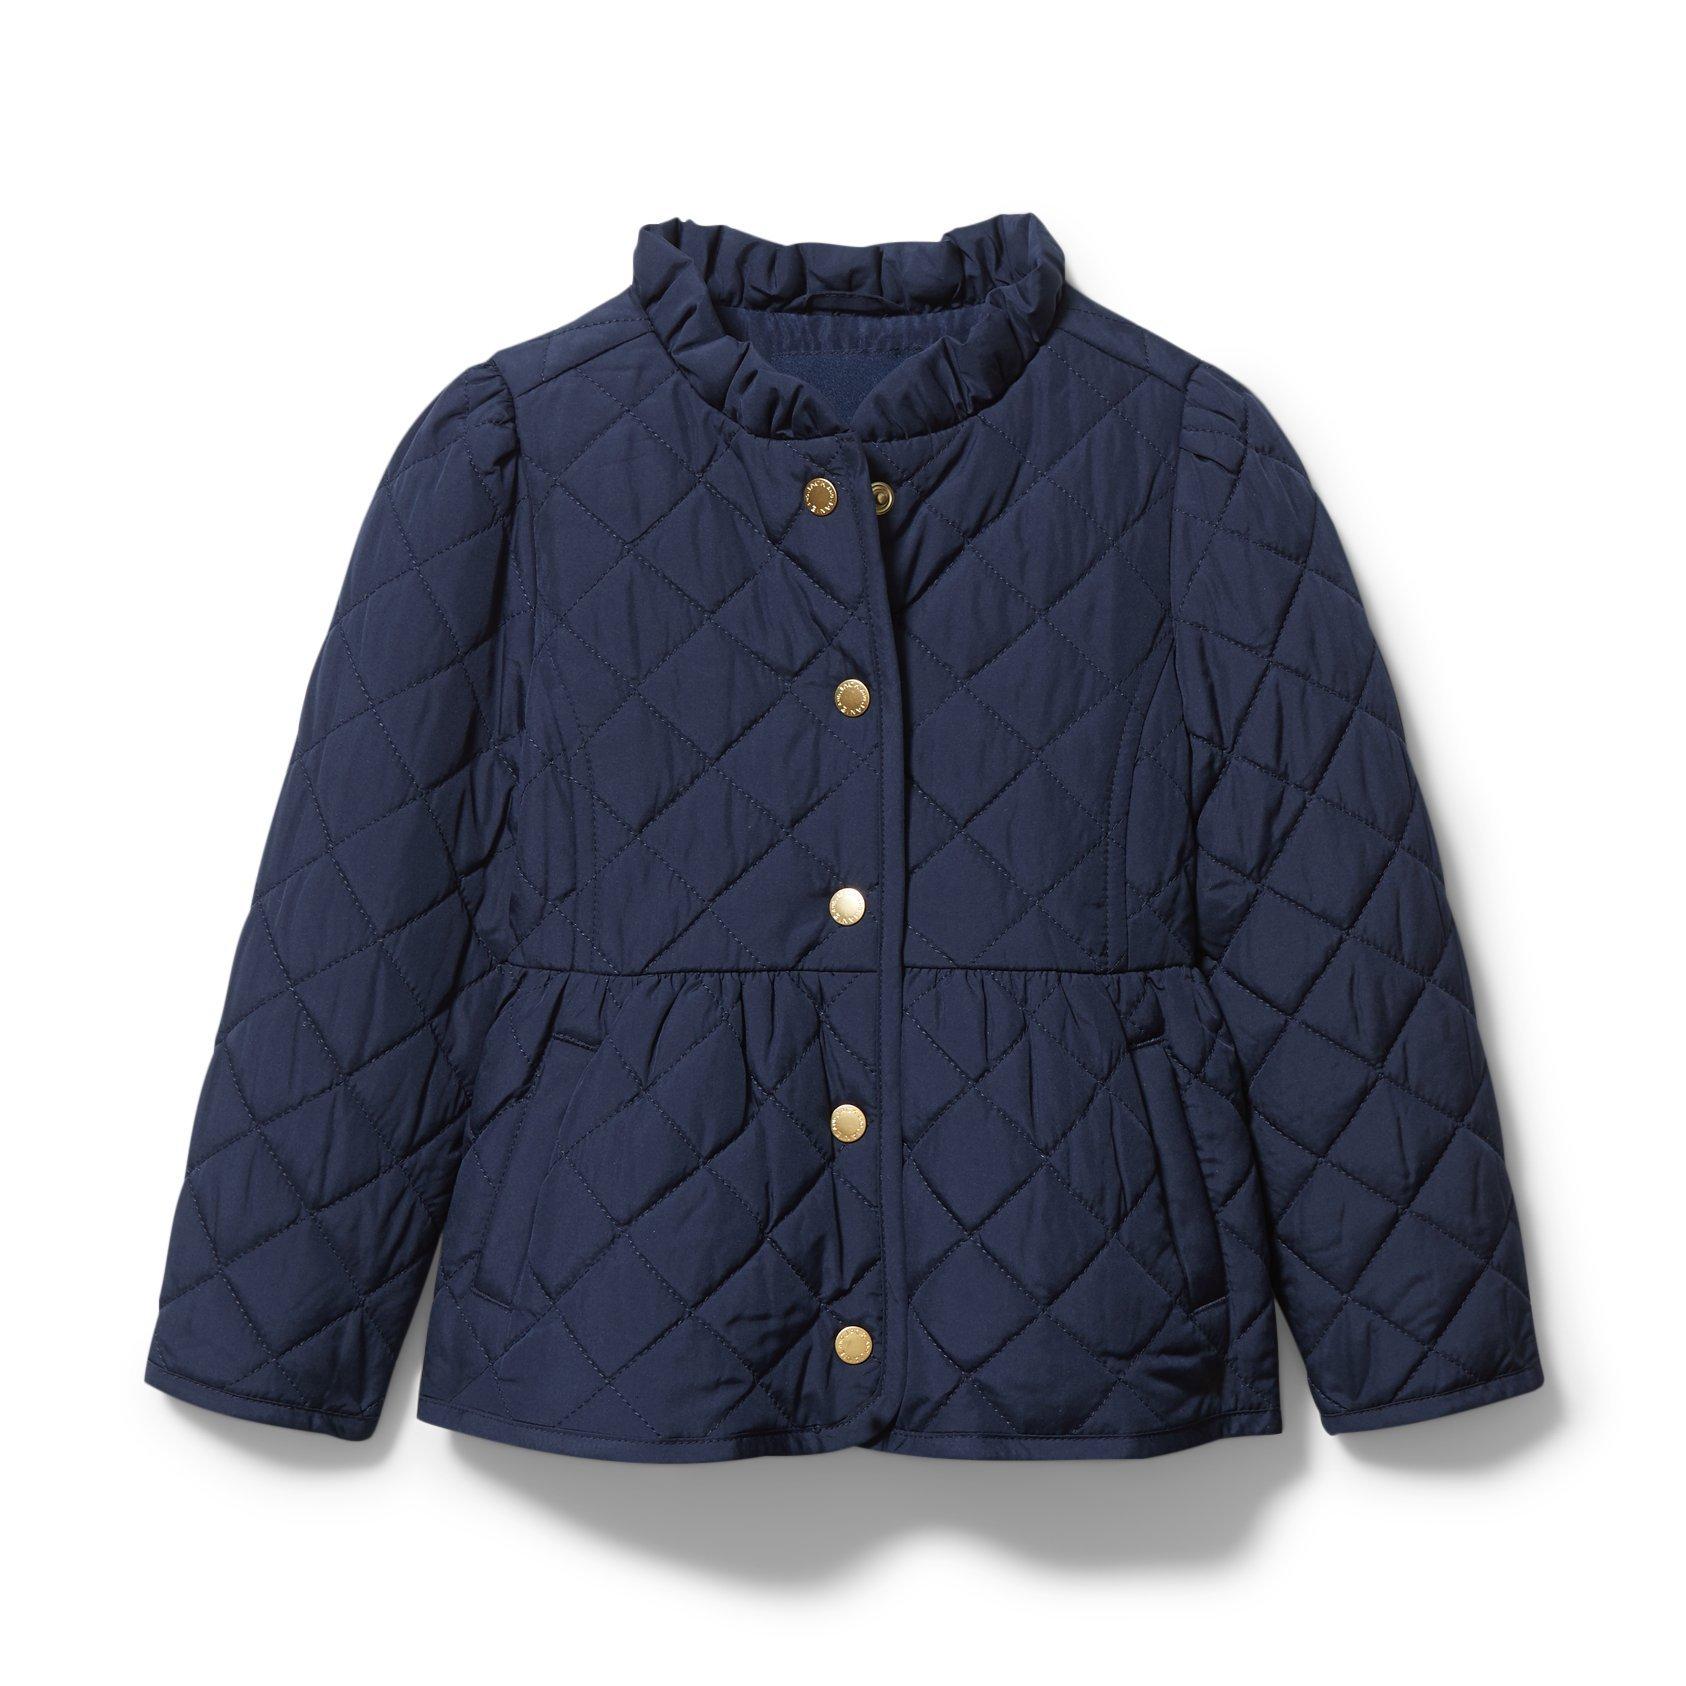 Girl Merchant Marine Quilted Peplum Barn Jacket by Janie and Jack